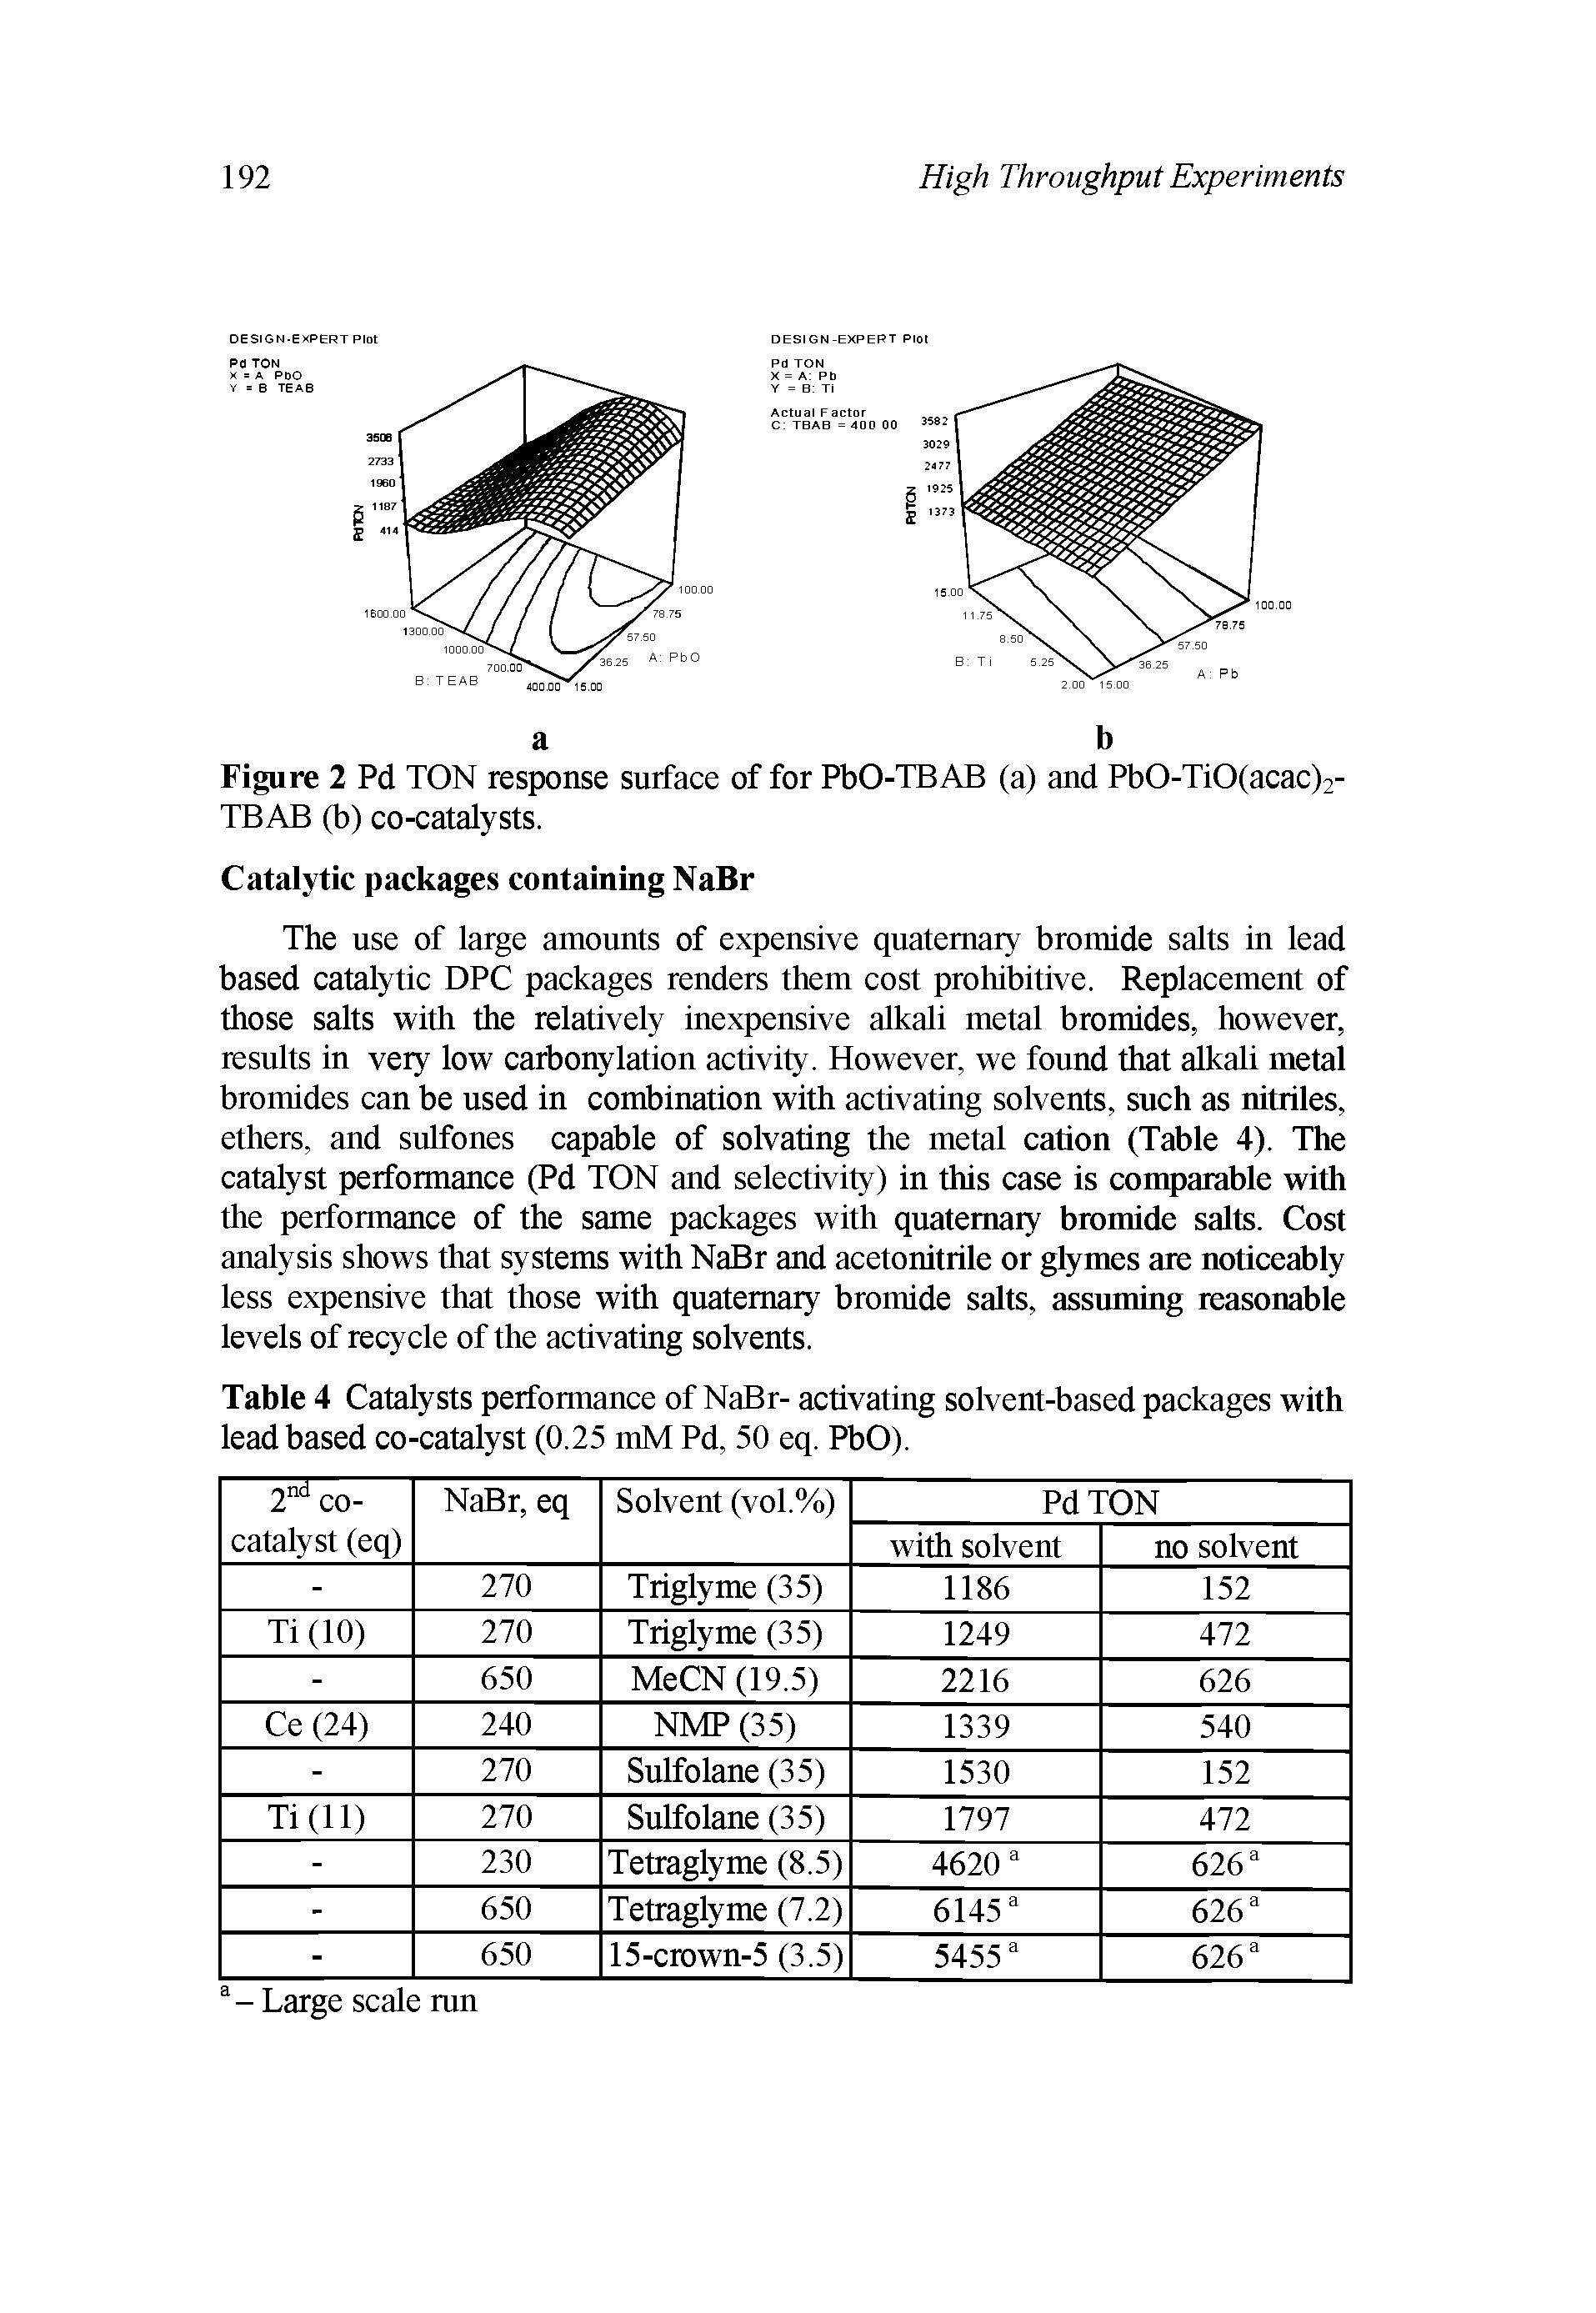 Table 4 Catalysts performance of NaBr- activating solvent-based packages with lead based co-catalyst (0.25 mM Pd, 50 eq. PbO).